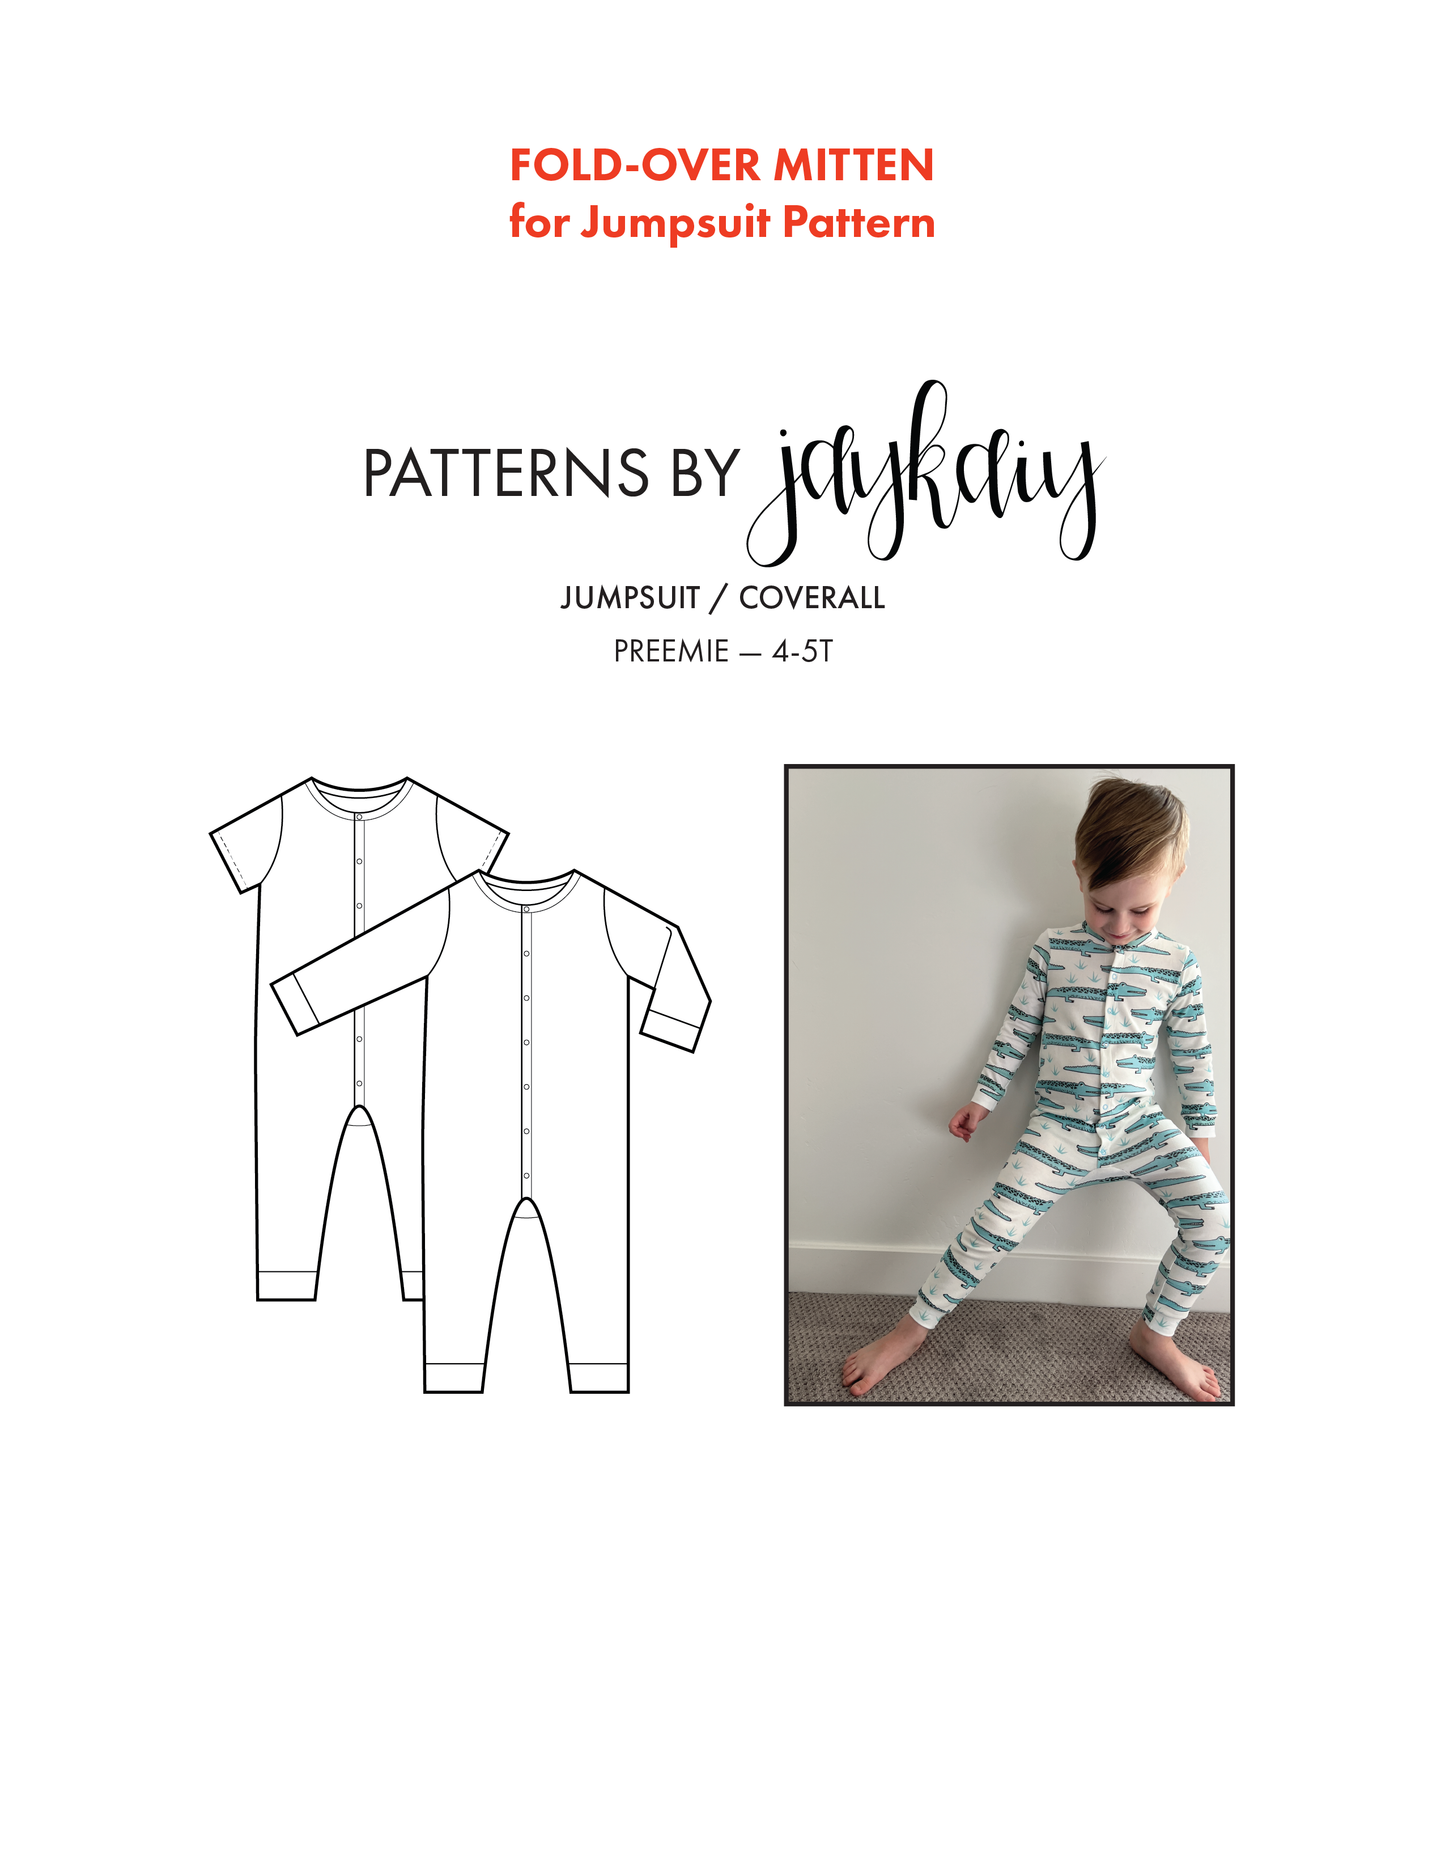 Fold-over Mitten ADD-ON for Footed PJ & Jumpsuit Pattern